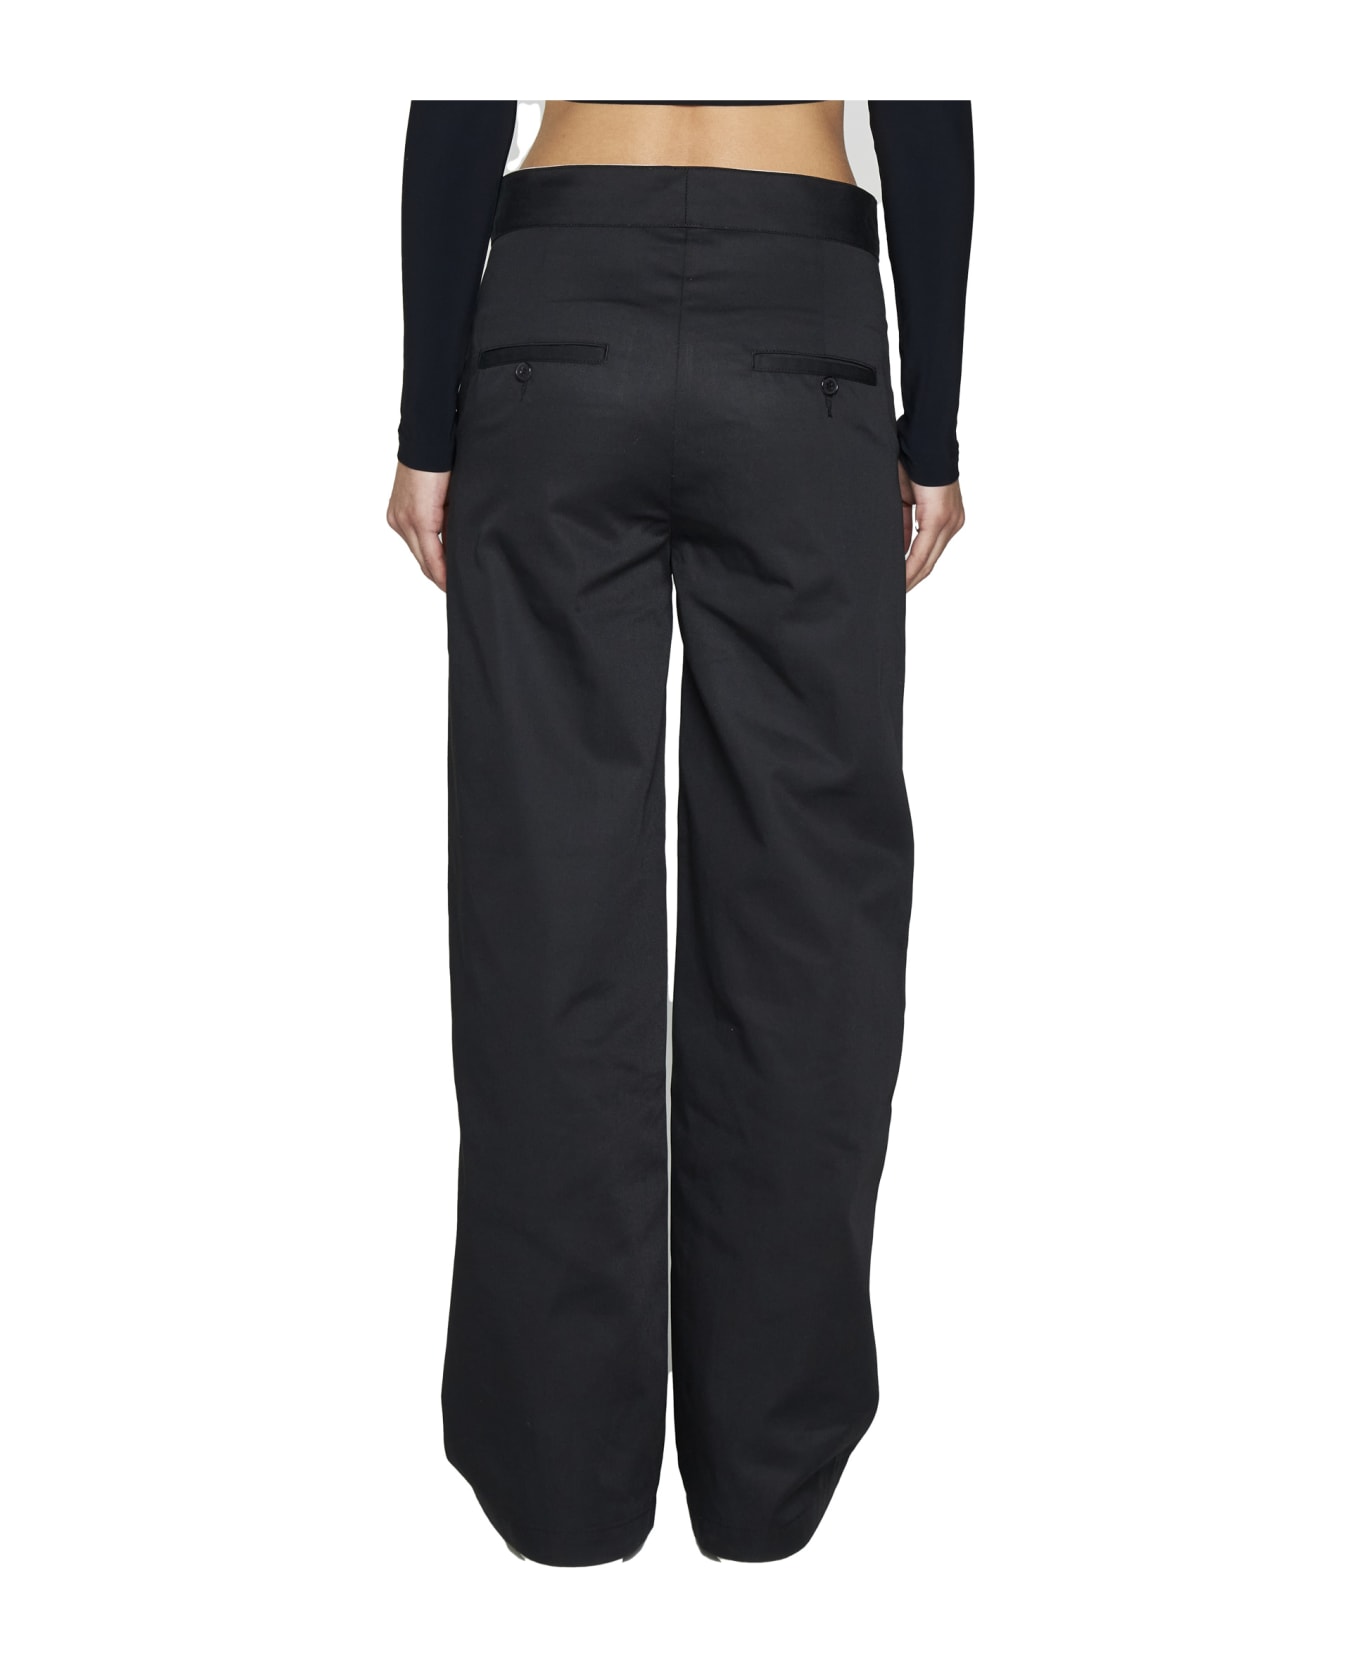 Palm Angels Polyester Blend Pant - Black white ボトムス